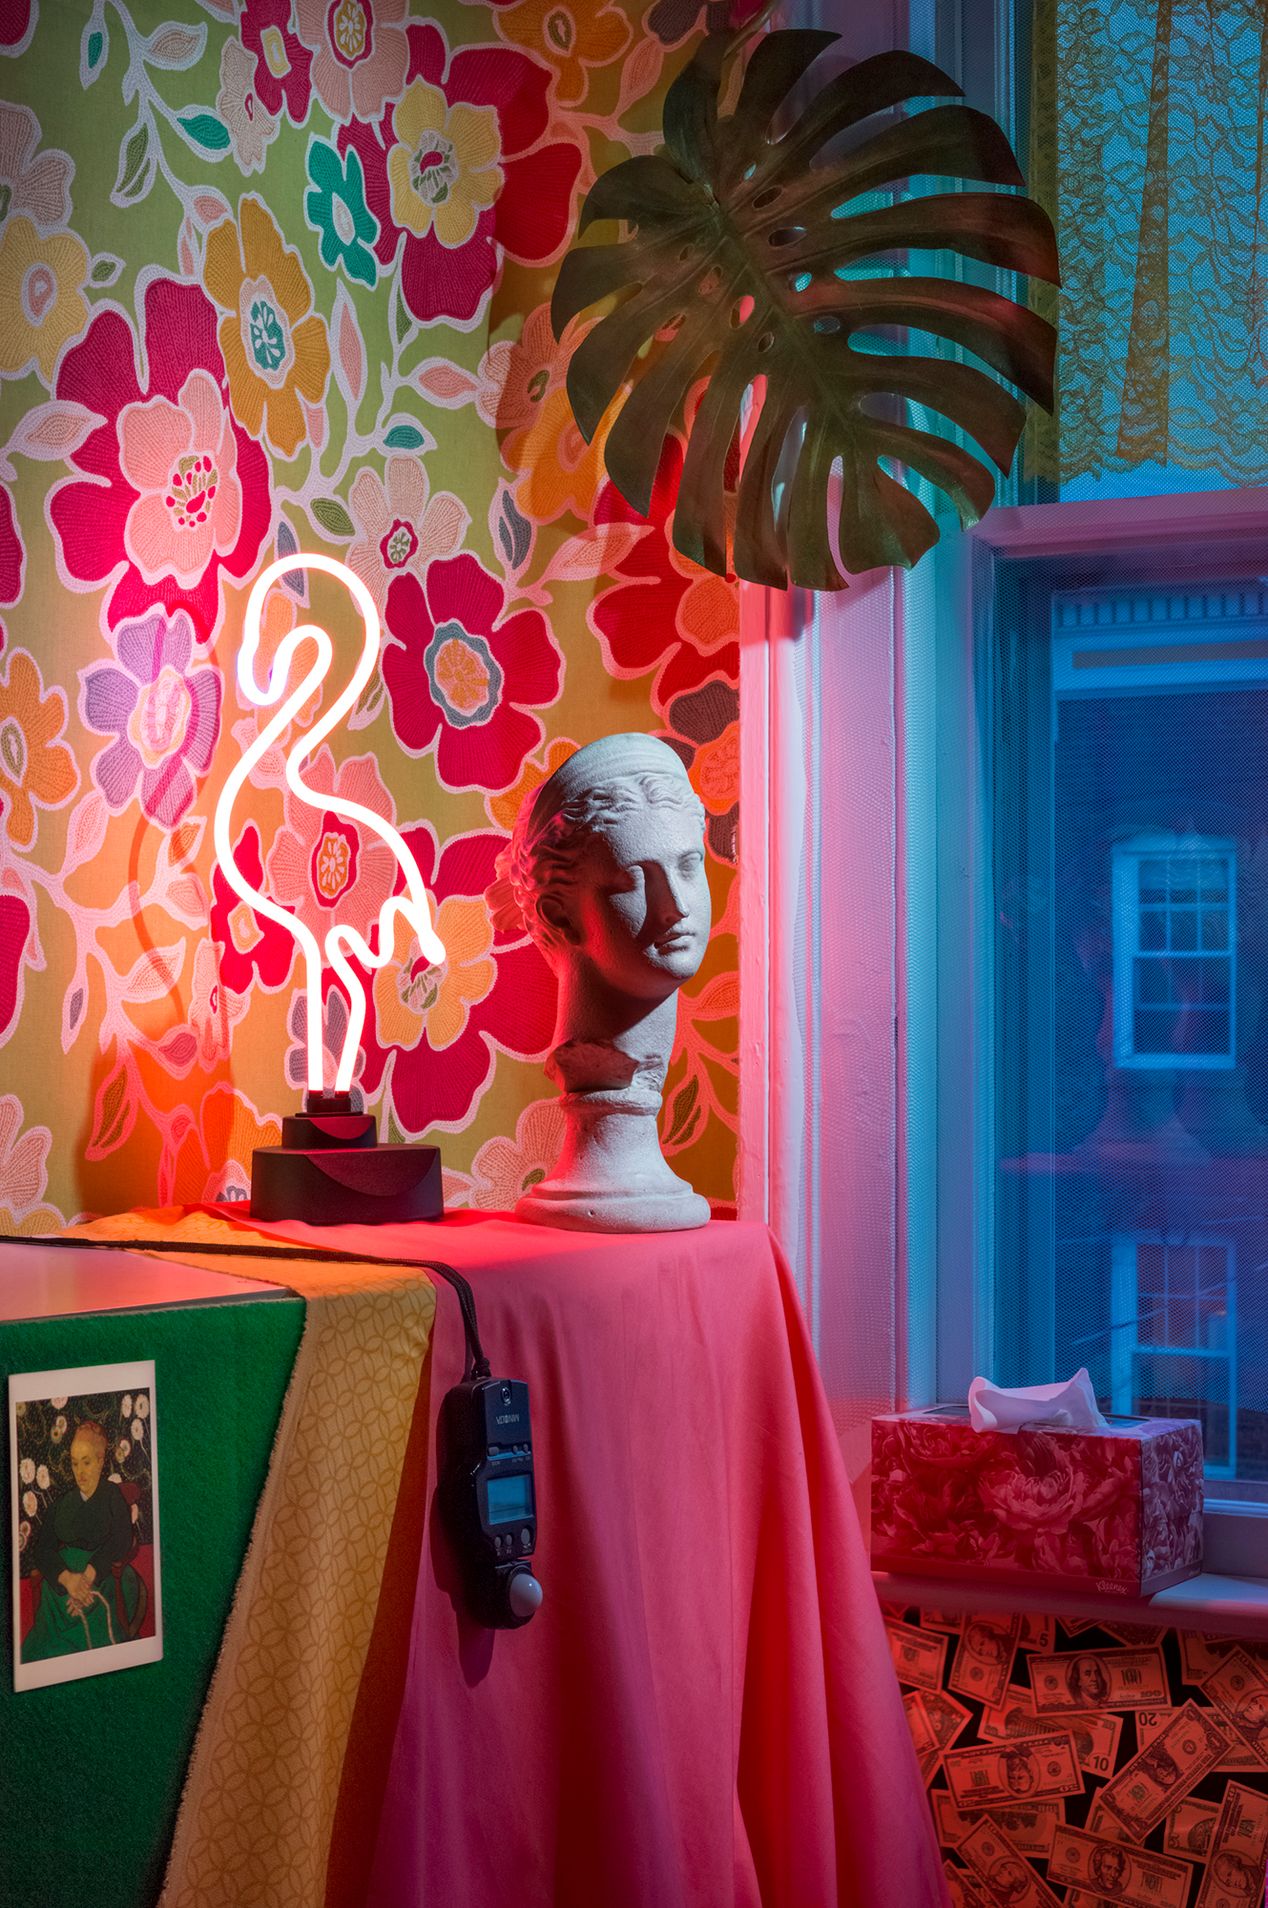 A colorful still life with a plaster head and a flamingo, fine art photography, Ilona Szwarc, Los Angeles artist.